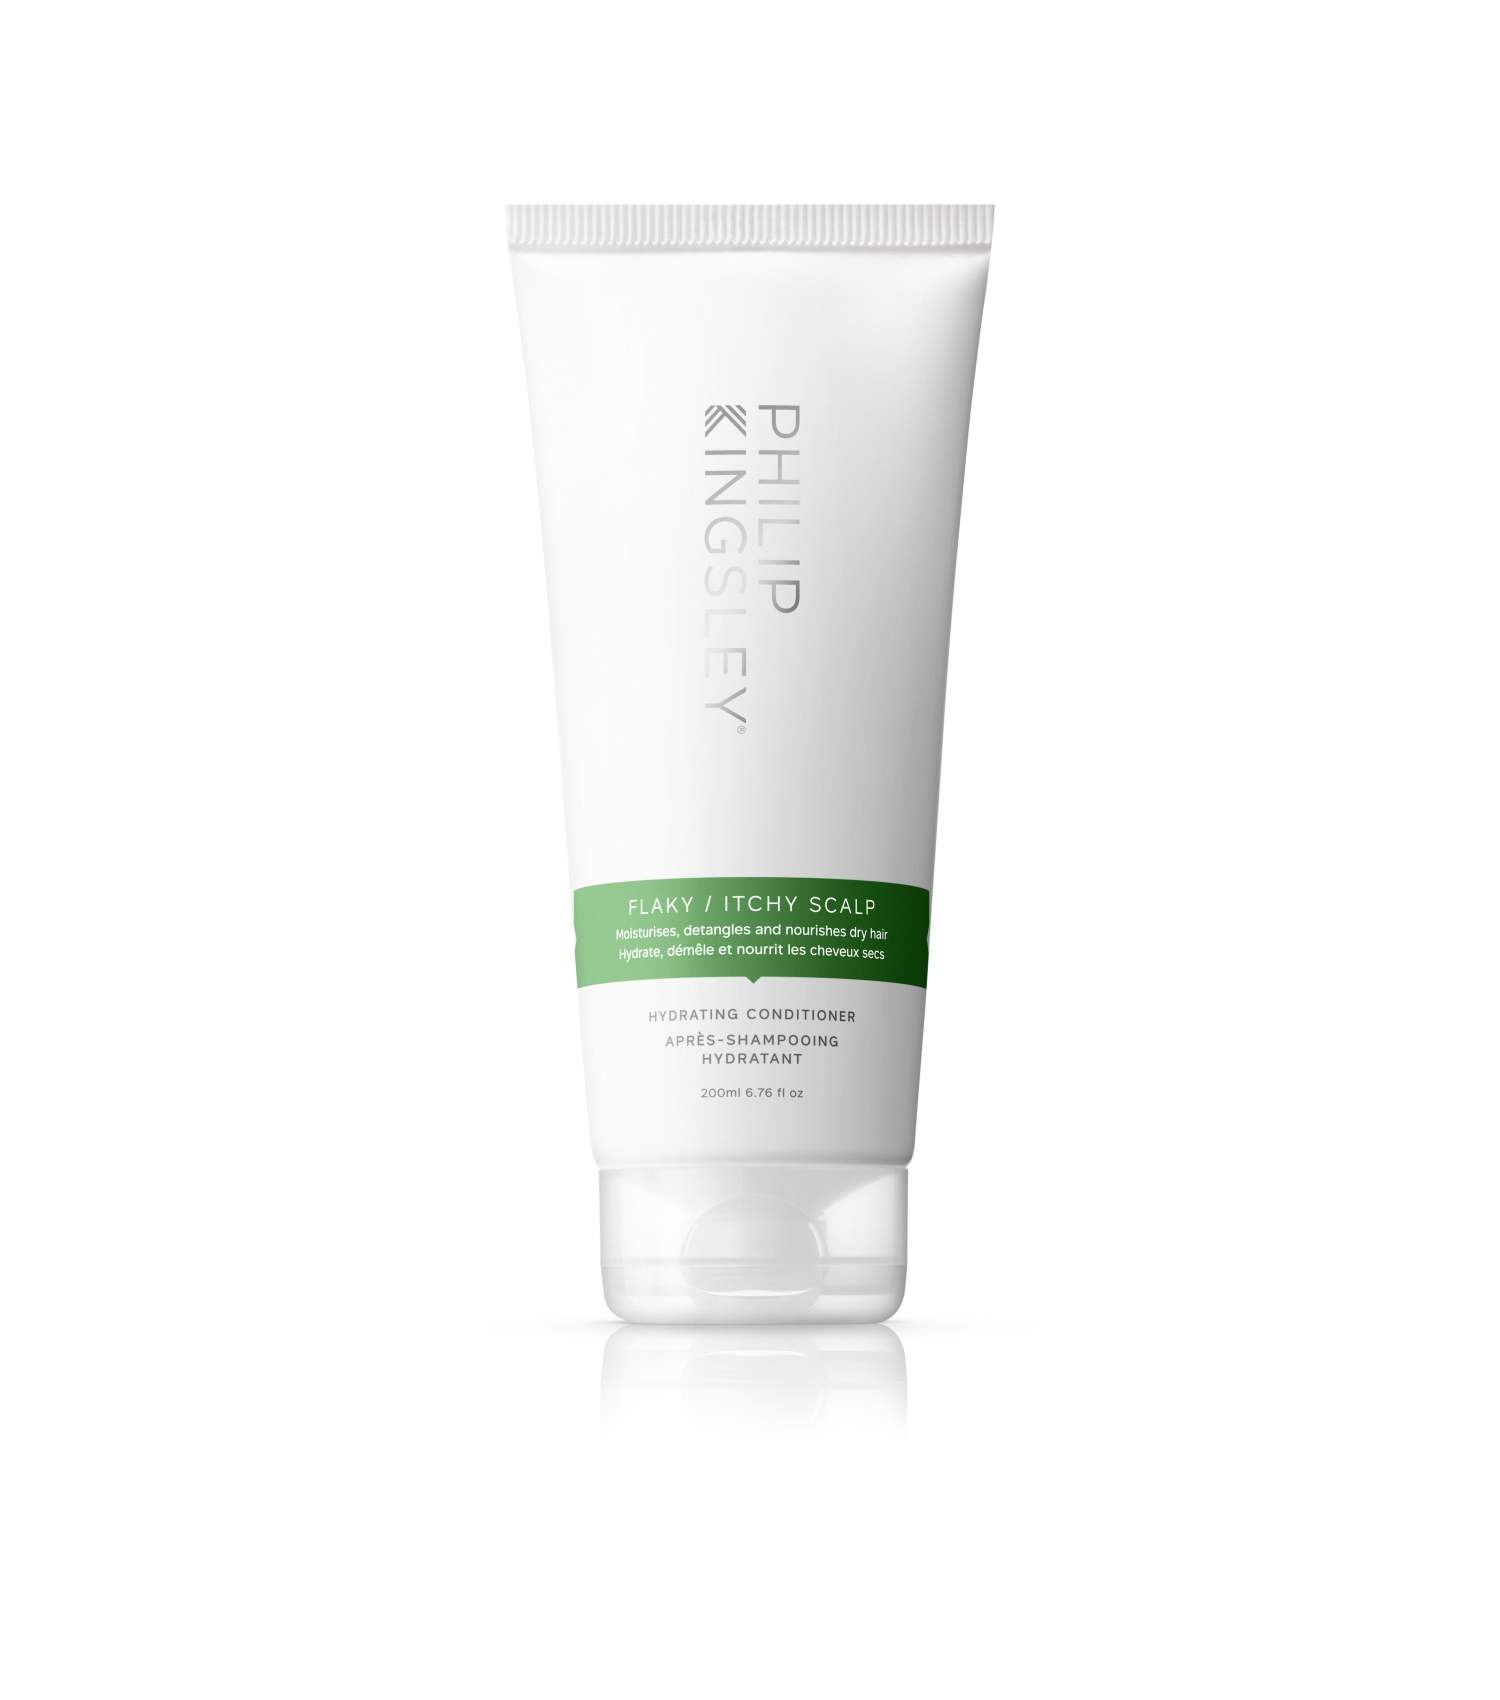 Philip Kingsley Flaky/Itchy Scalp Hydrating Conditioner